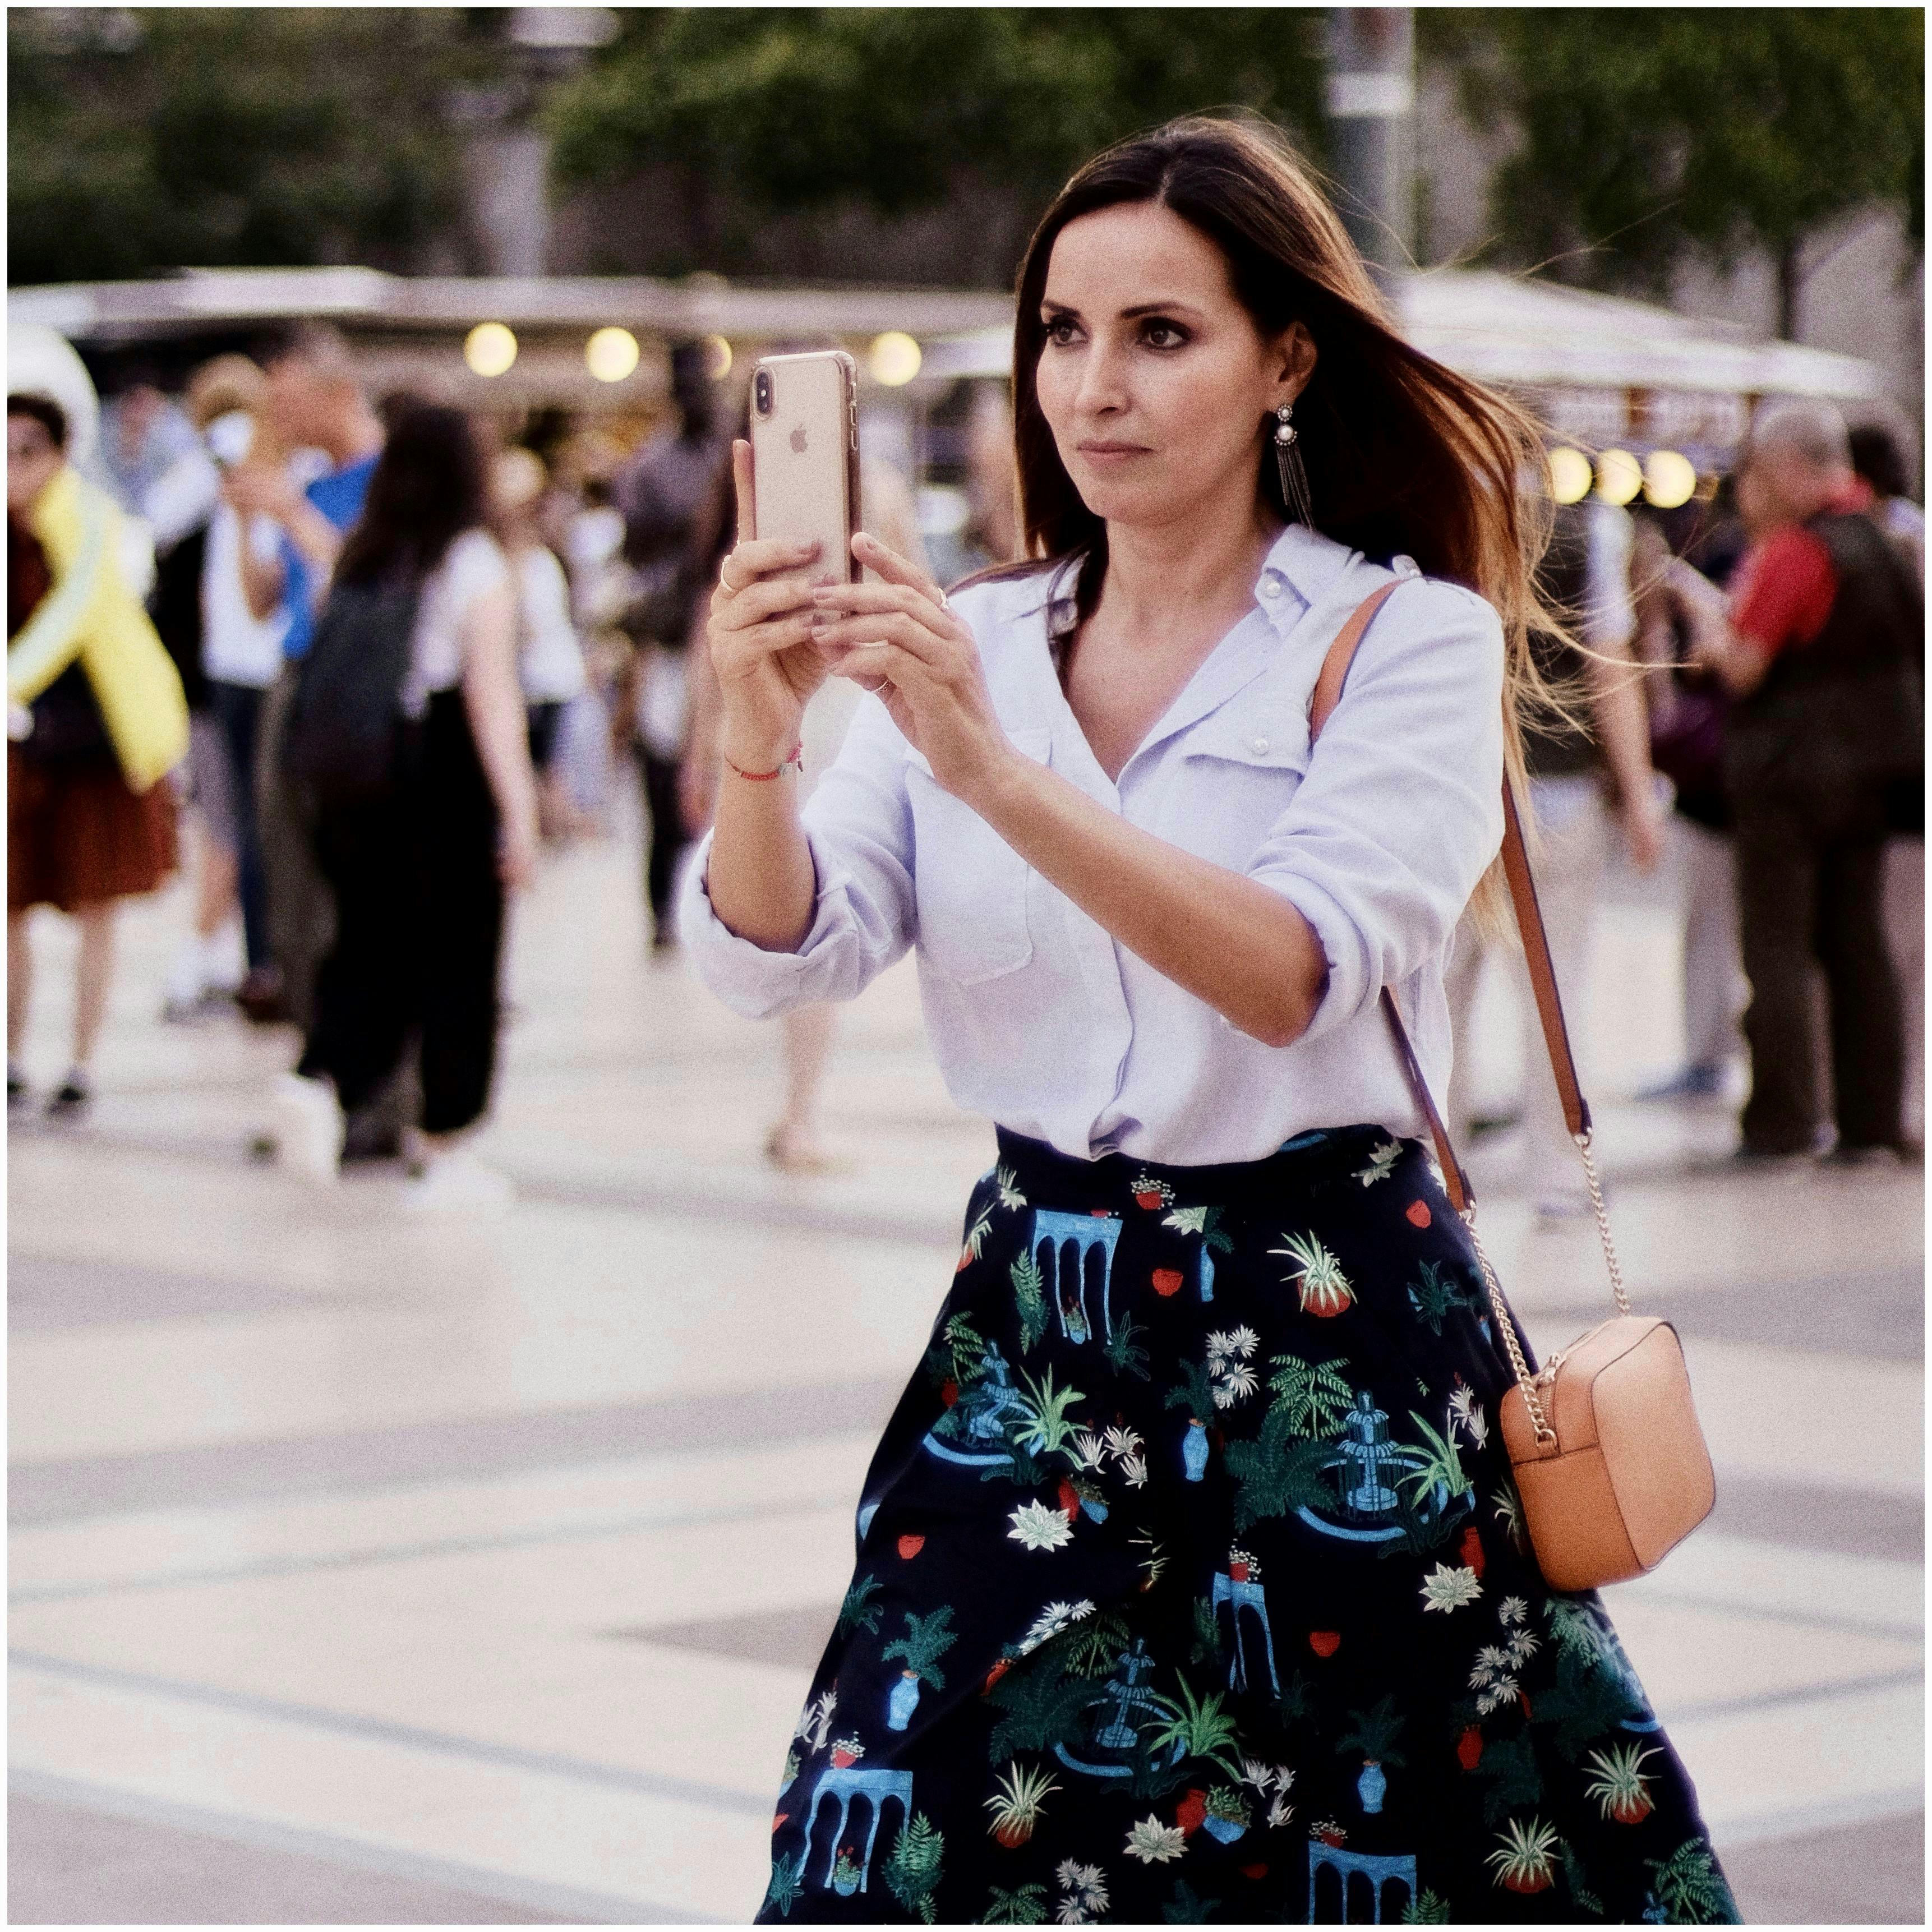 photo of a woman taking a photo using her cellphone